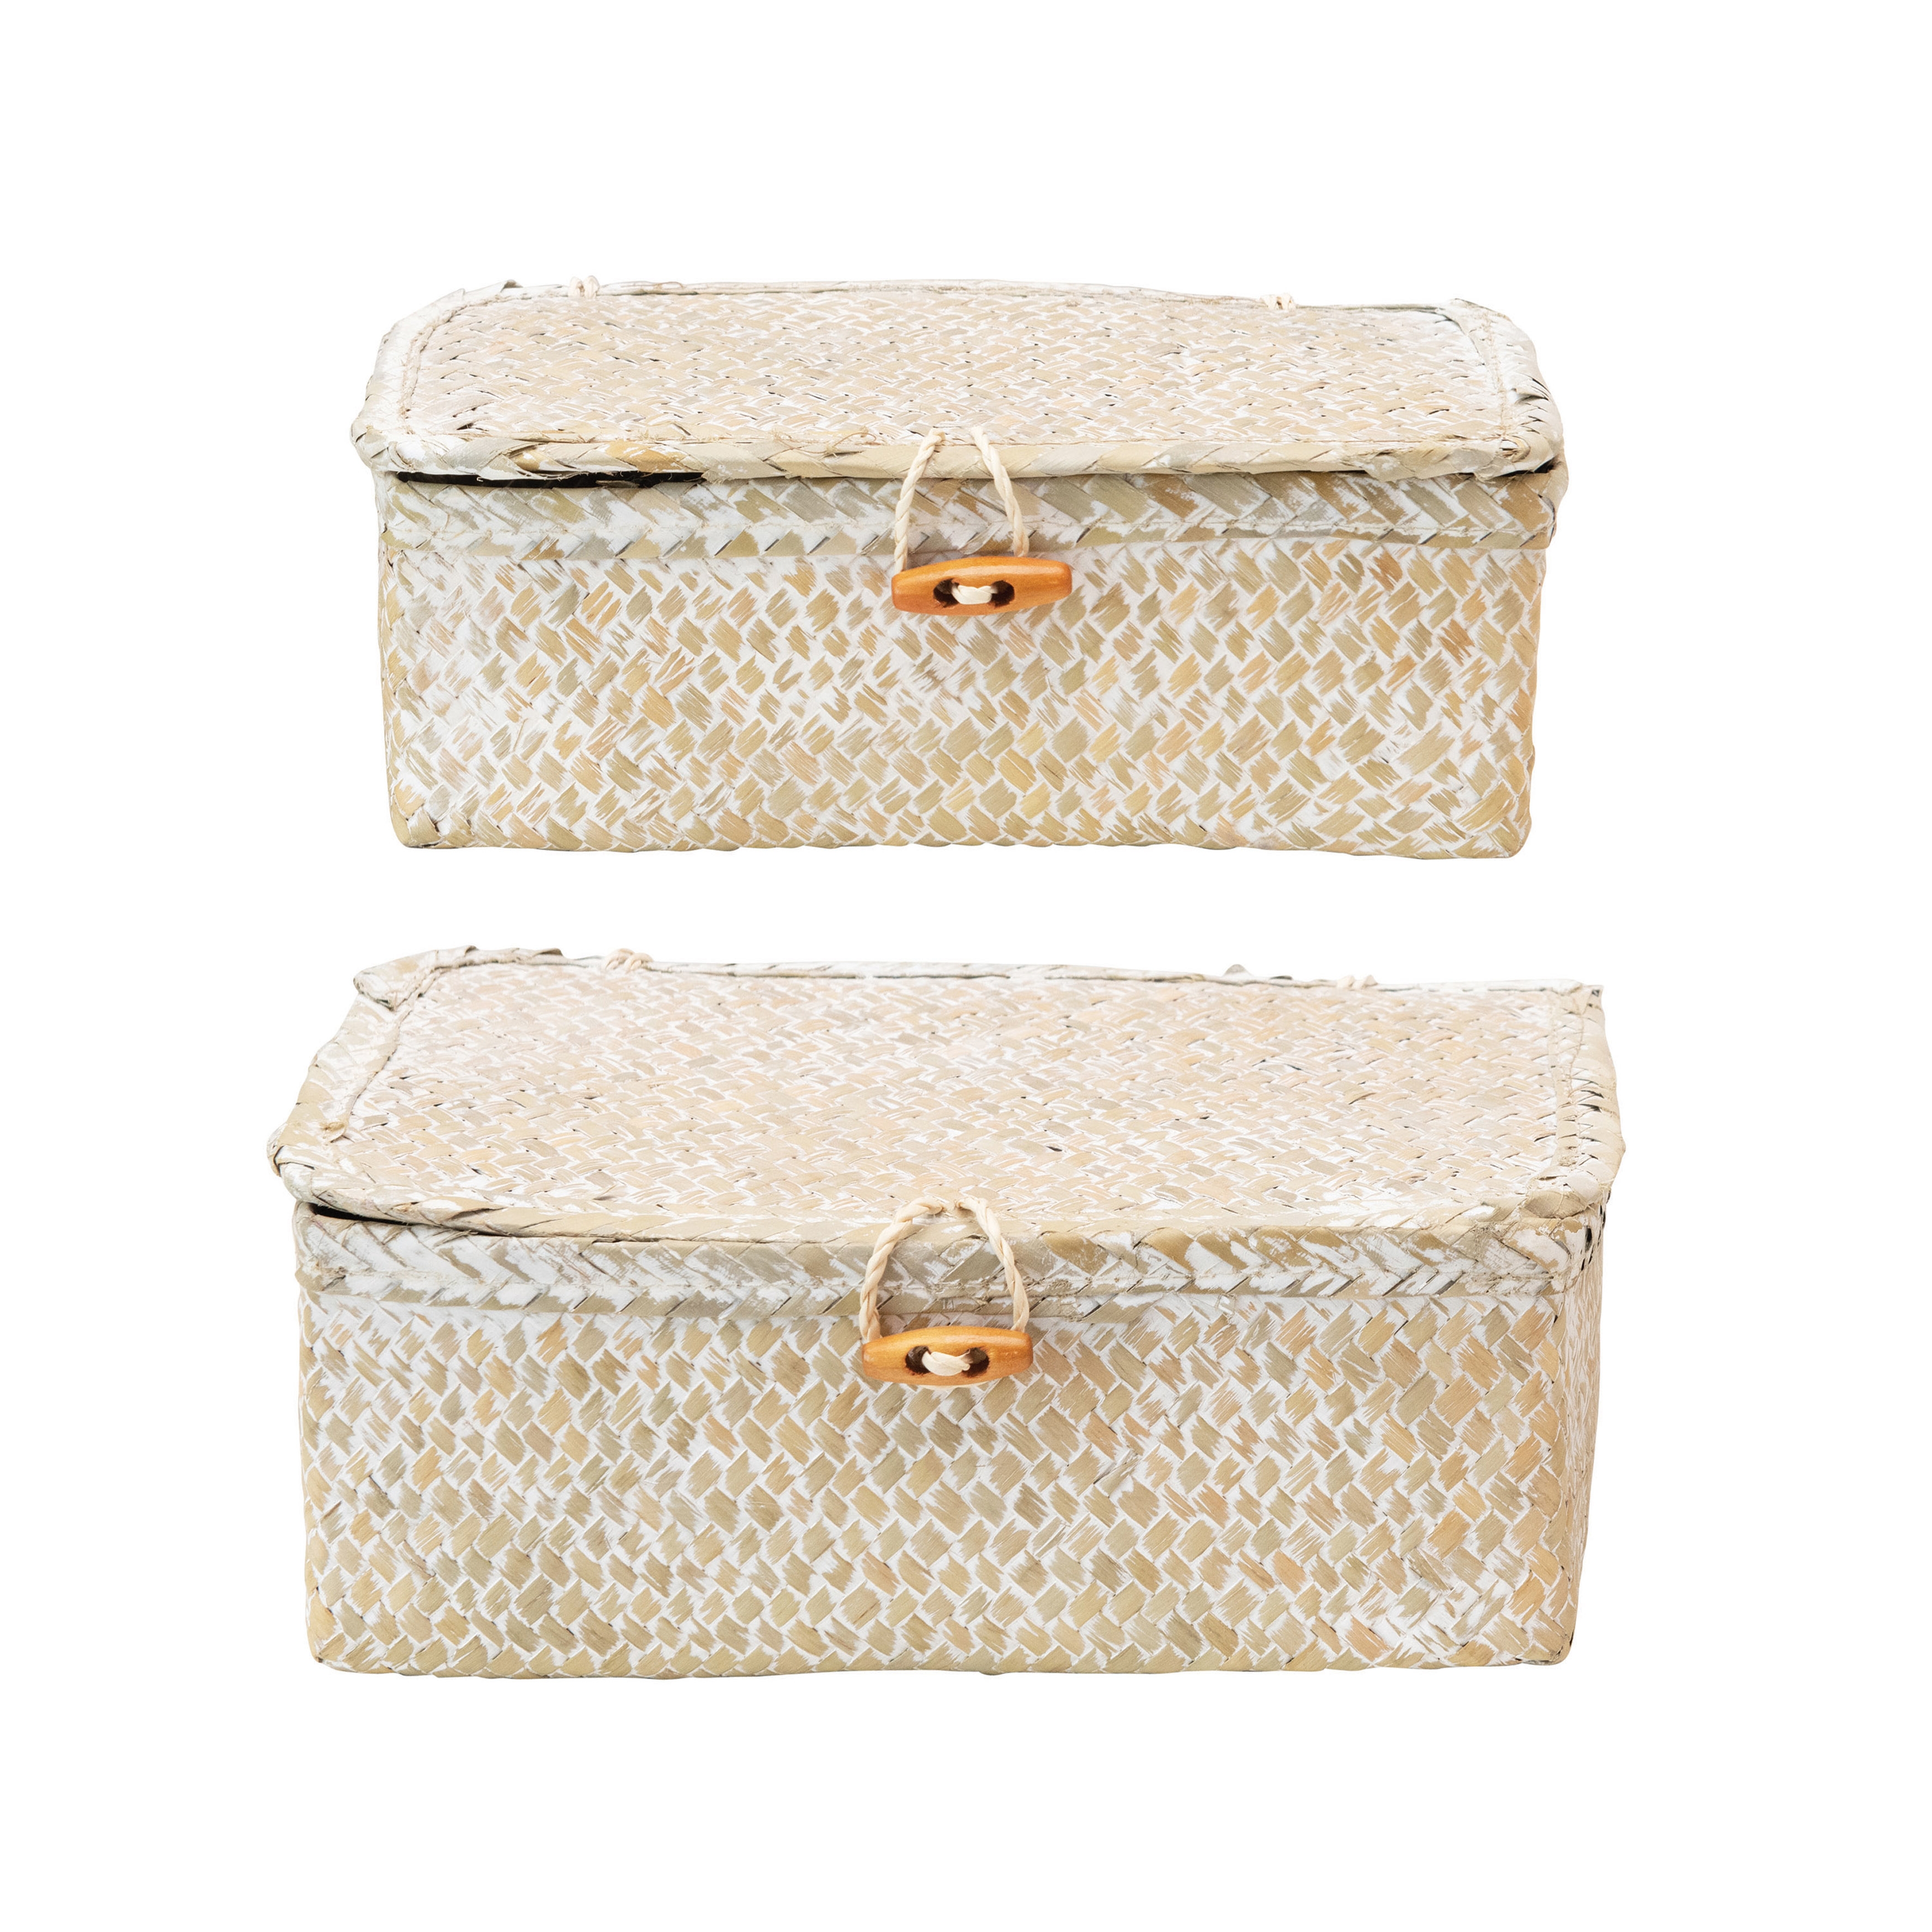 Hand-Woven Seagrass Boxes with Lids & Toggle Closure, Whitewashed, Set of 2 - Image 0